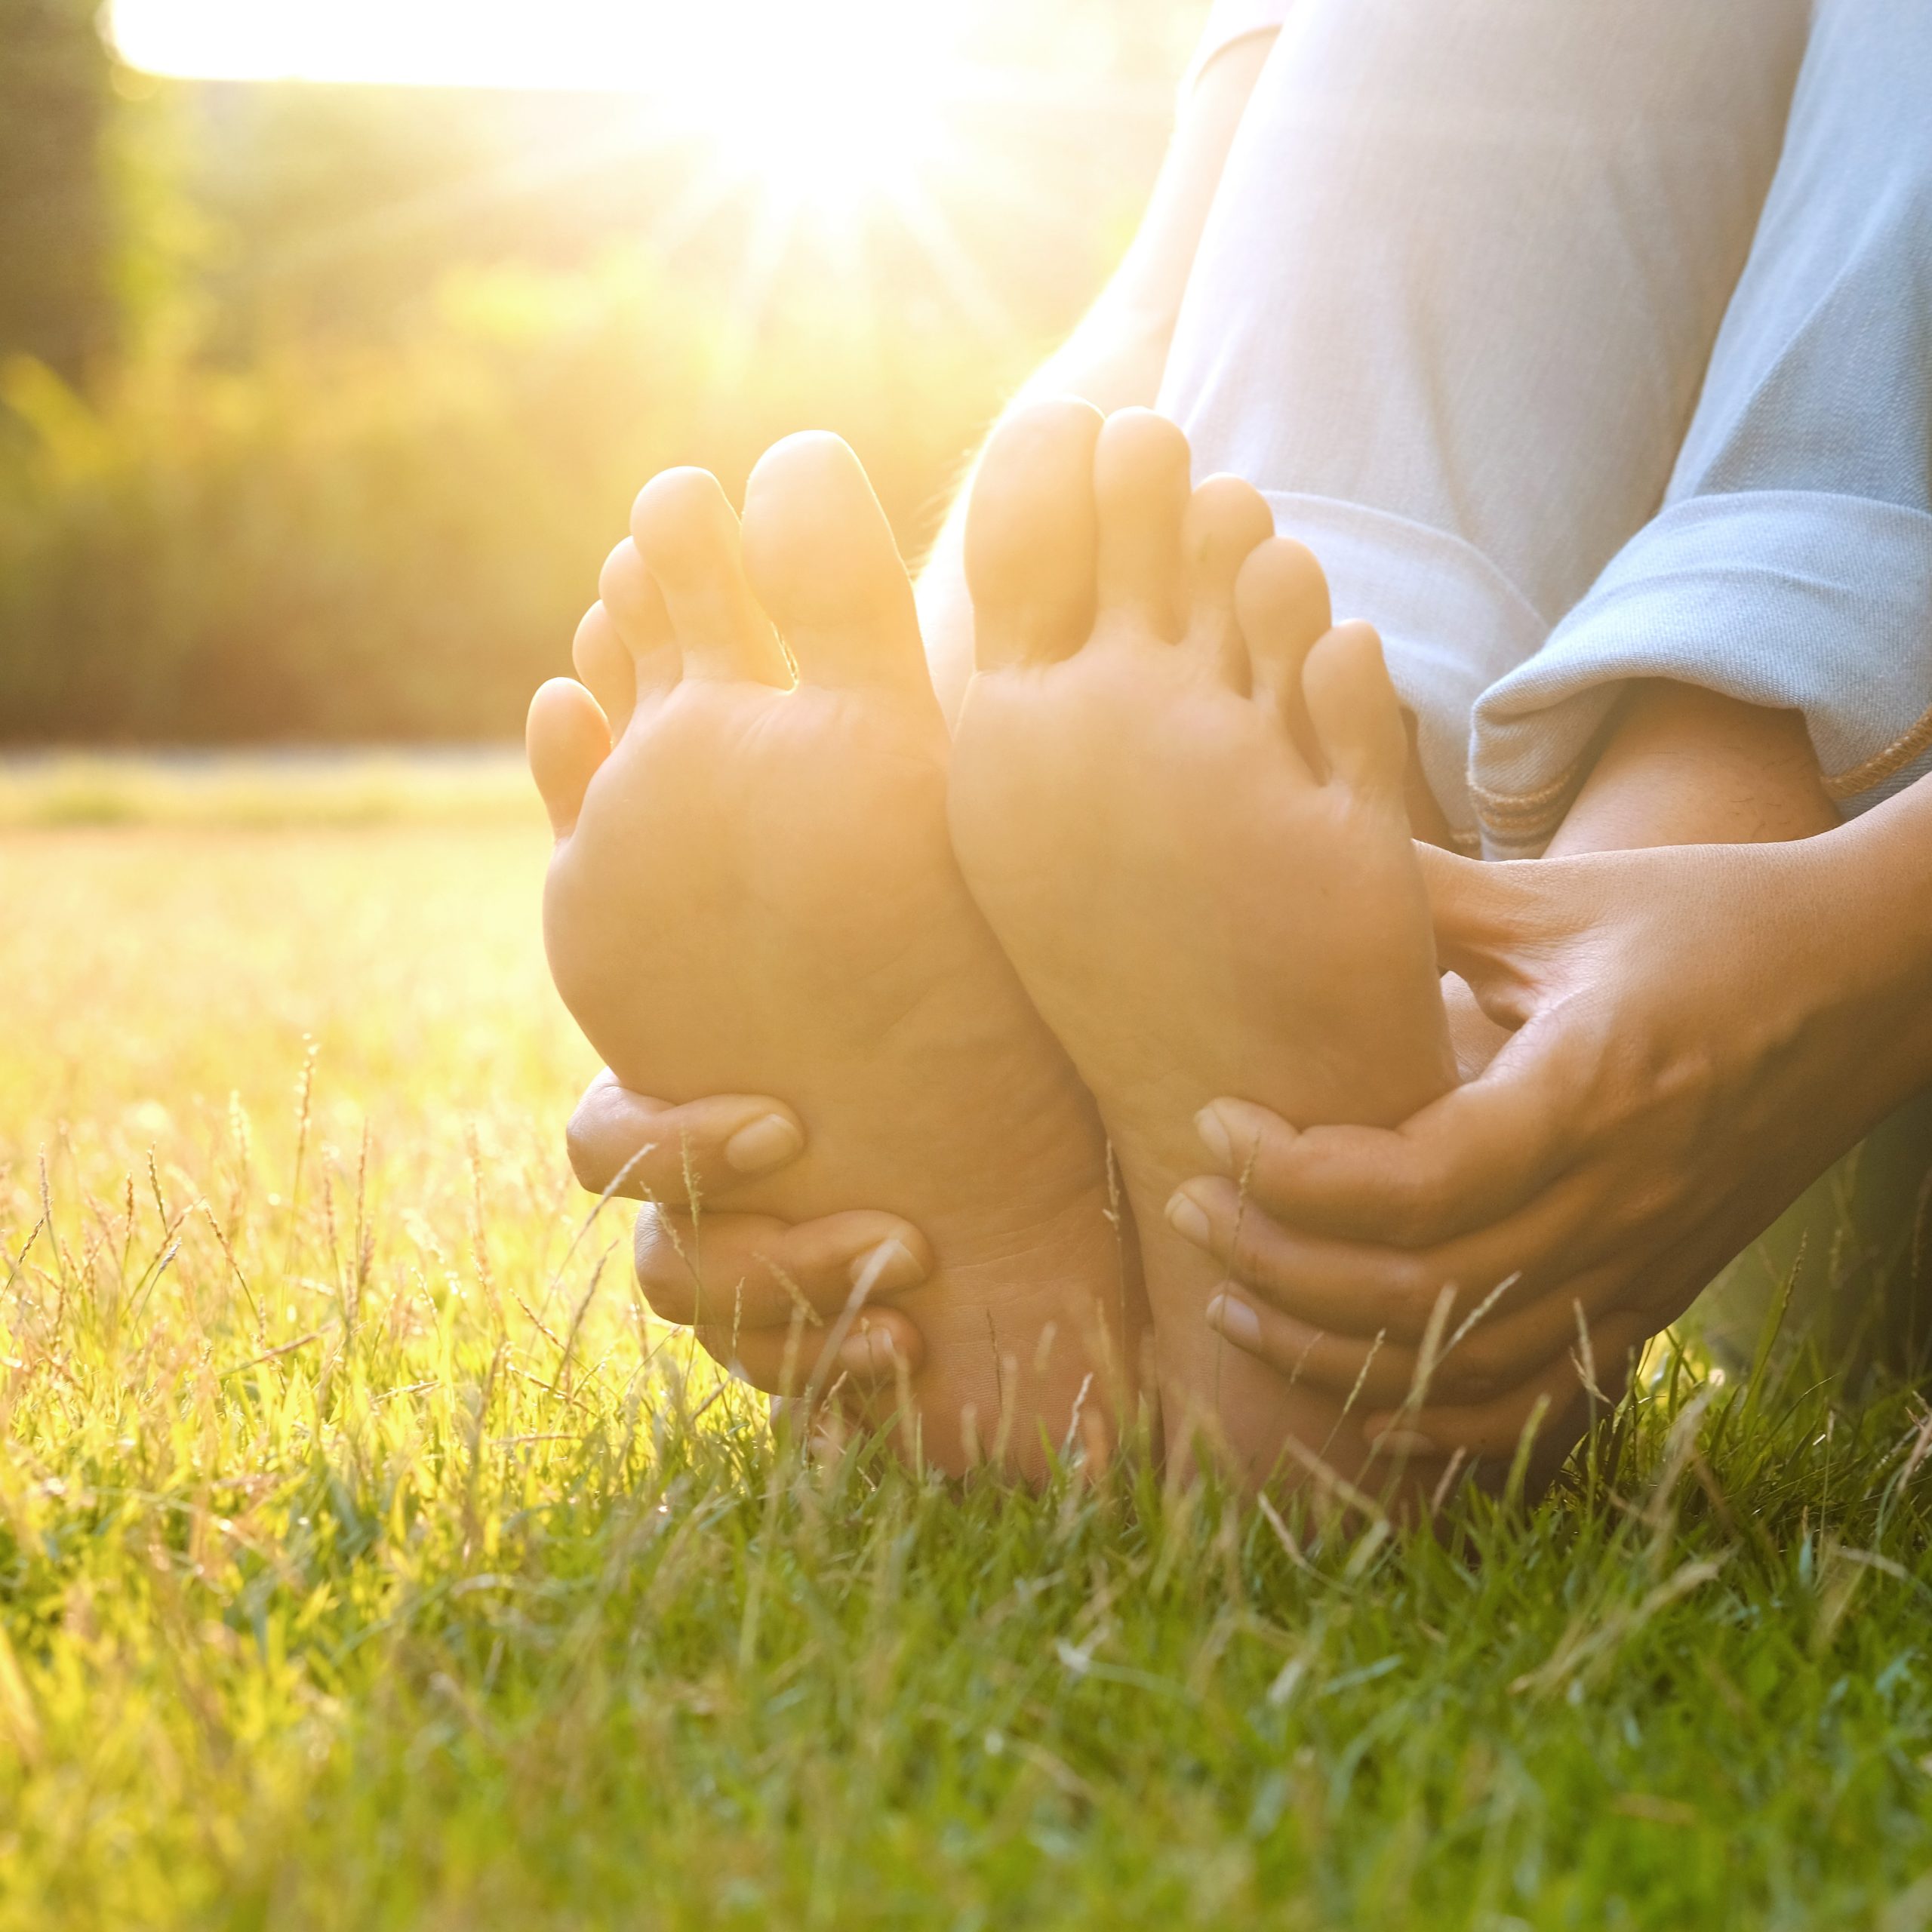 Osteopathic Manual Practitioner Darshel Diaz Discusses the importance of feet